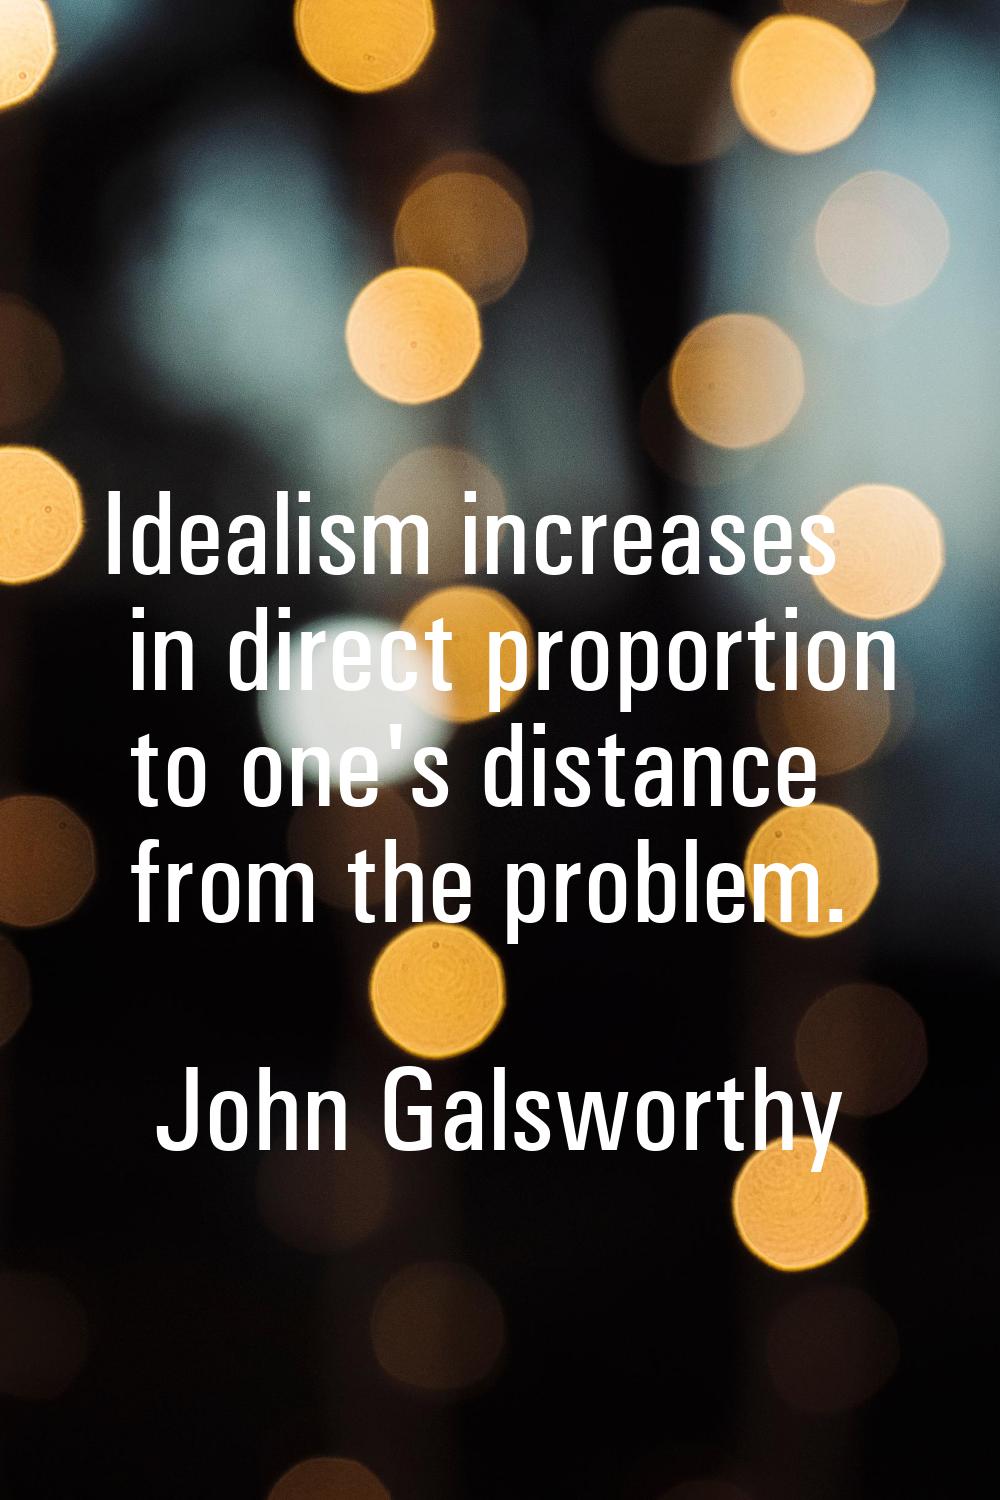 Idealism increases in direct proportion to one's distance from the problem.